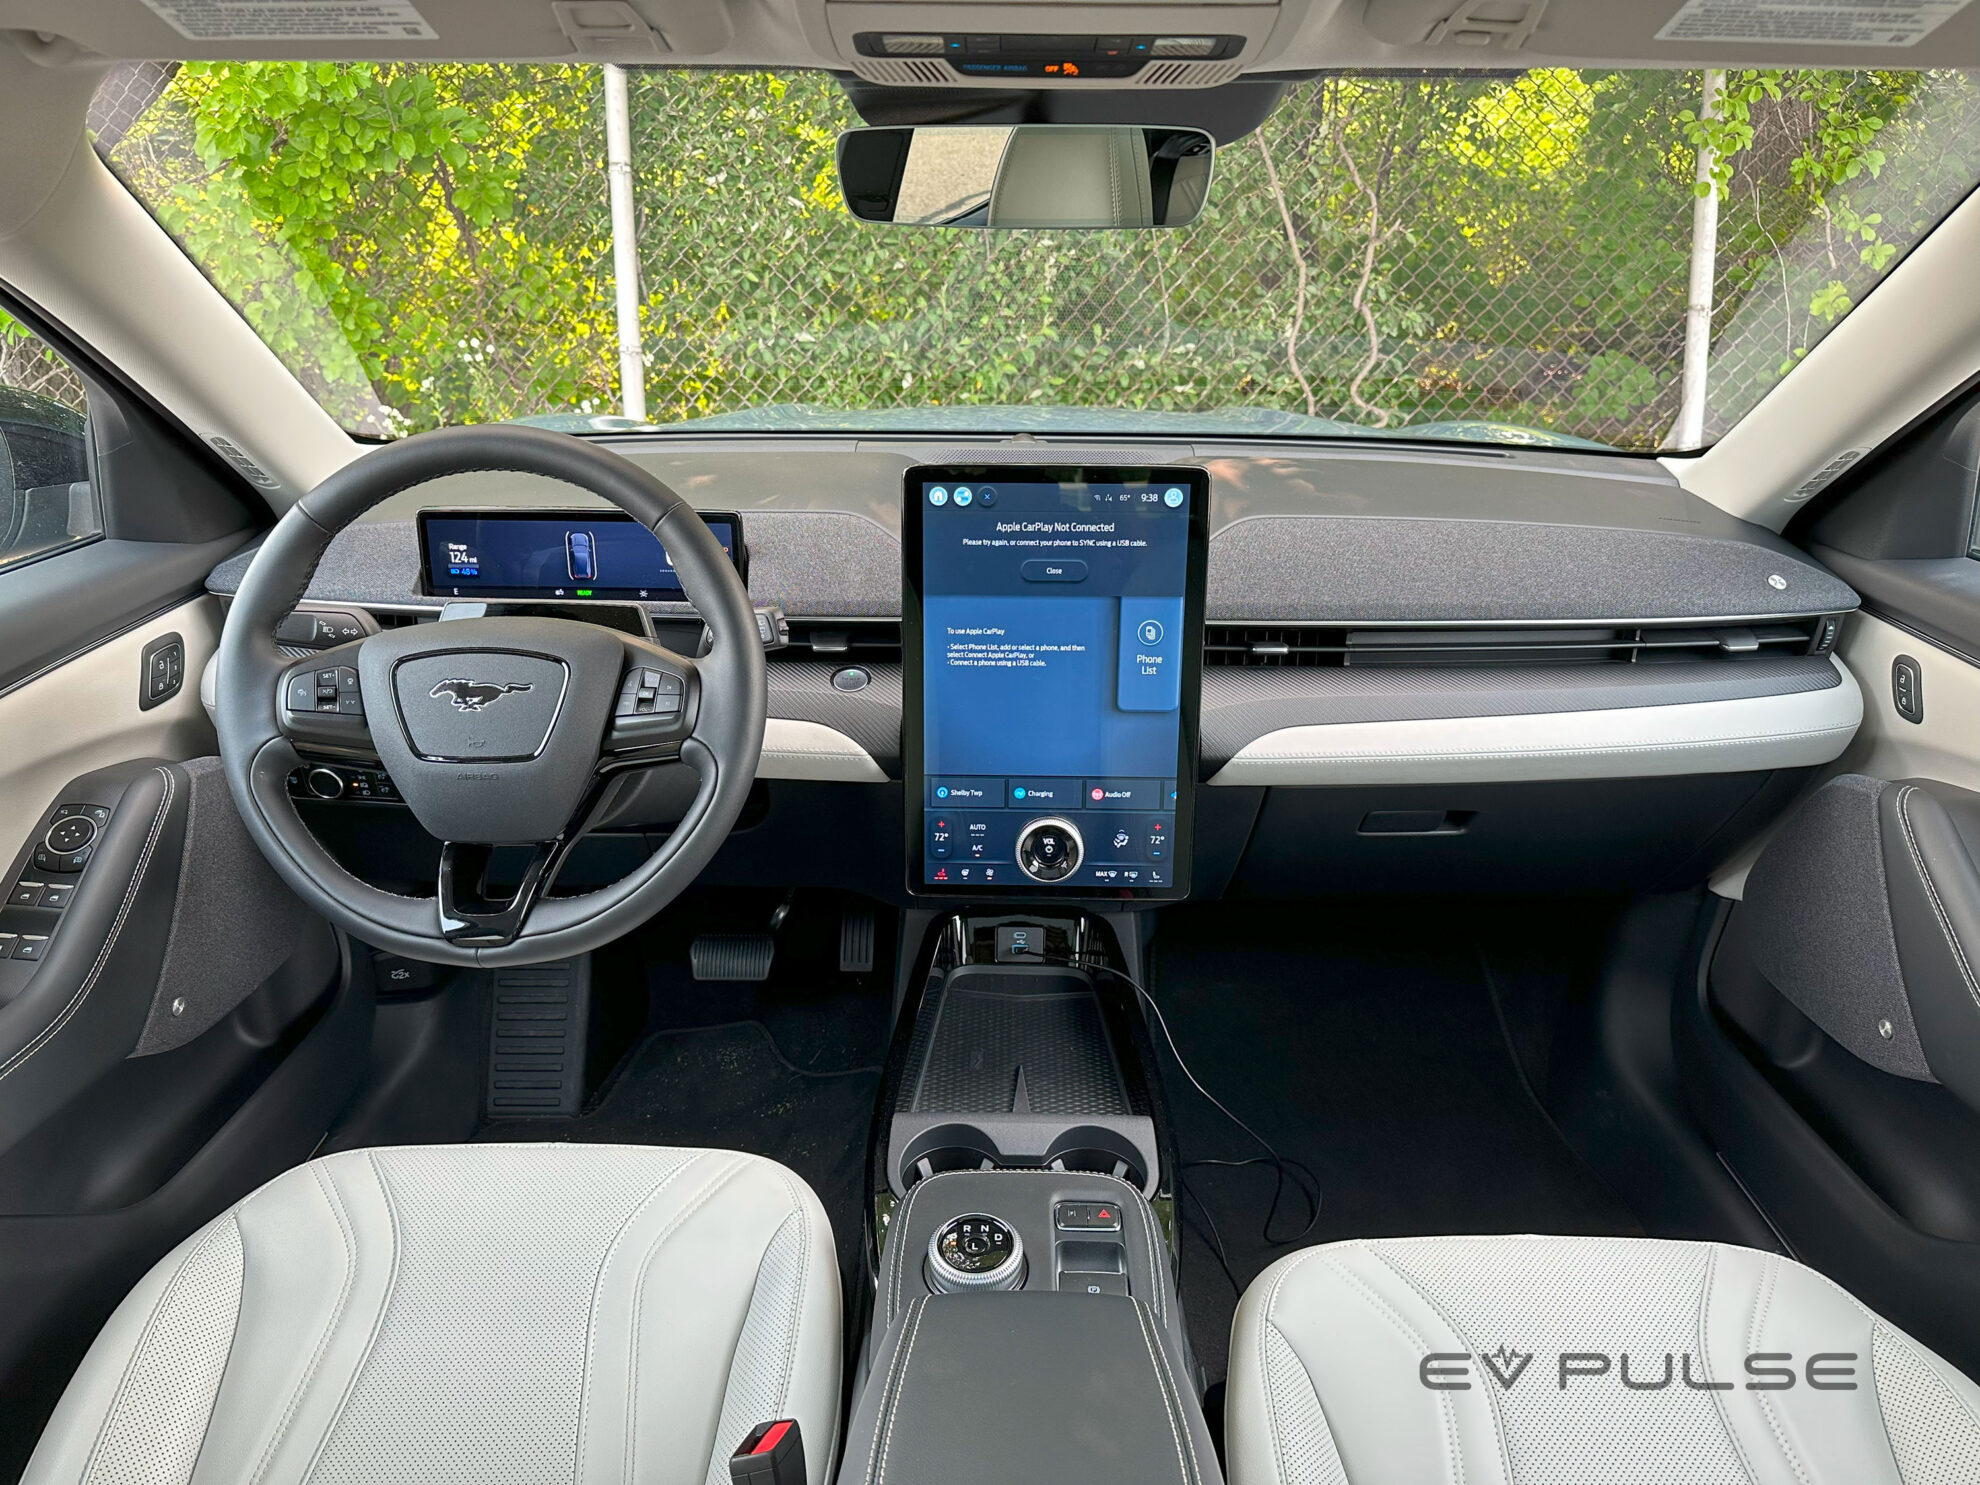 Ford BlueCruise Version 1.2 Hands-Off Review: More Automation